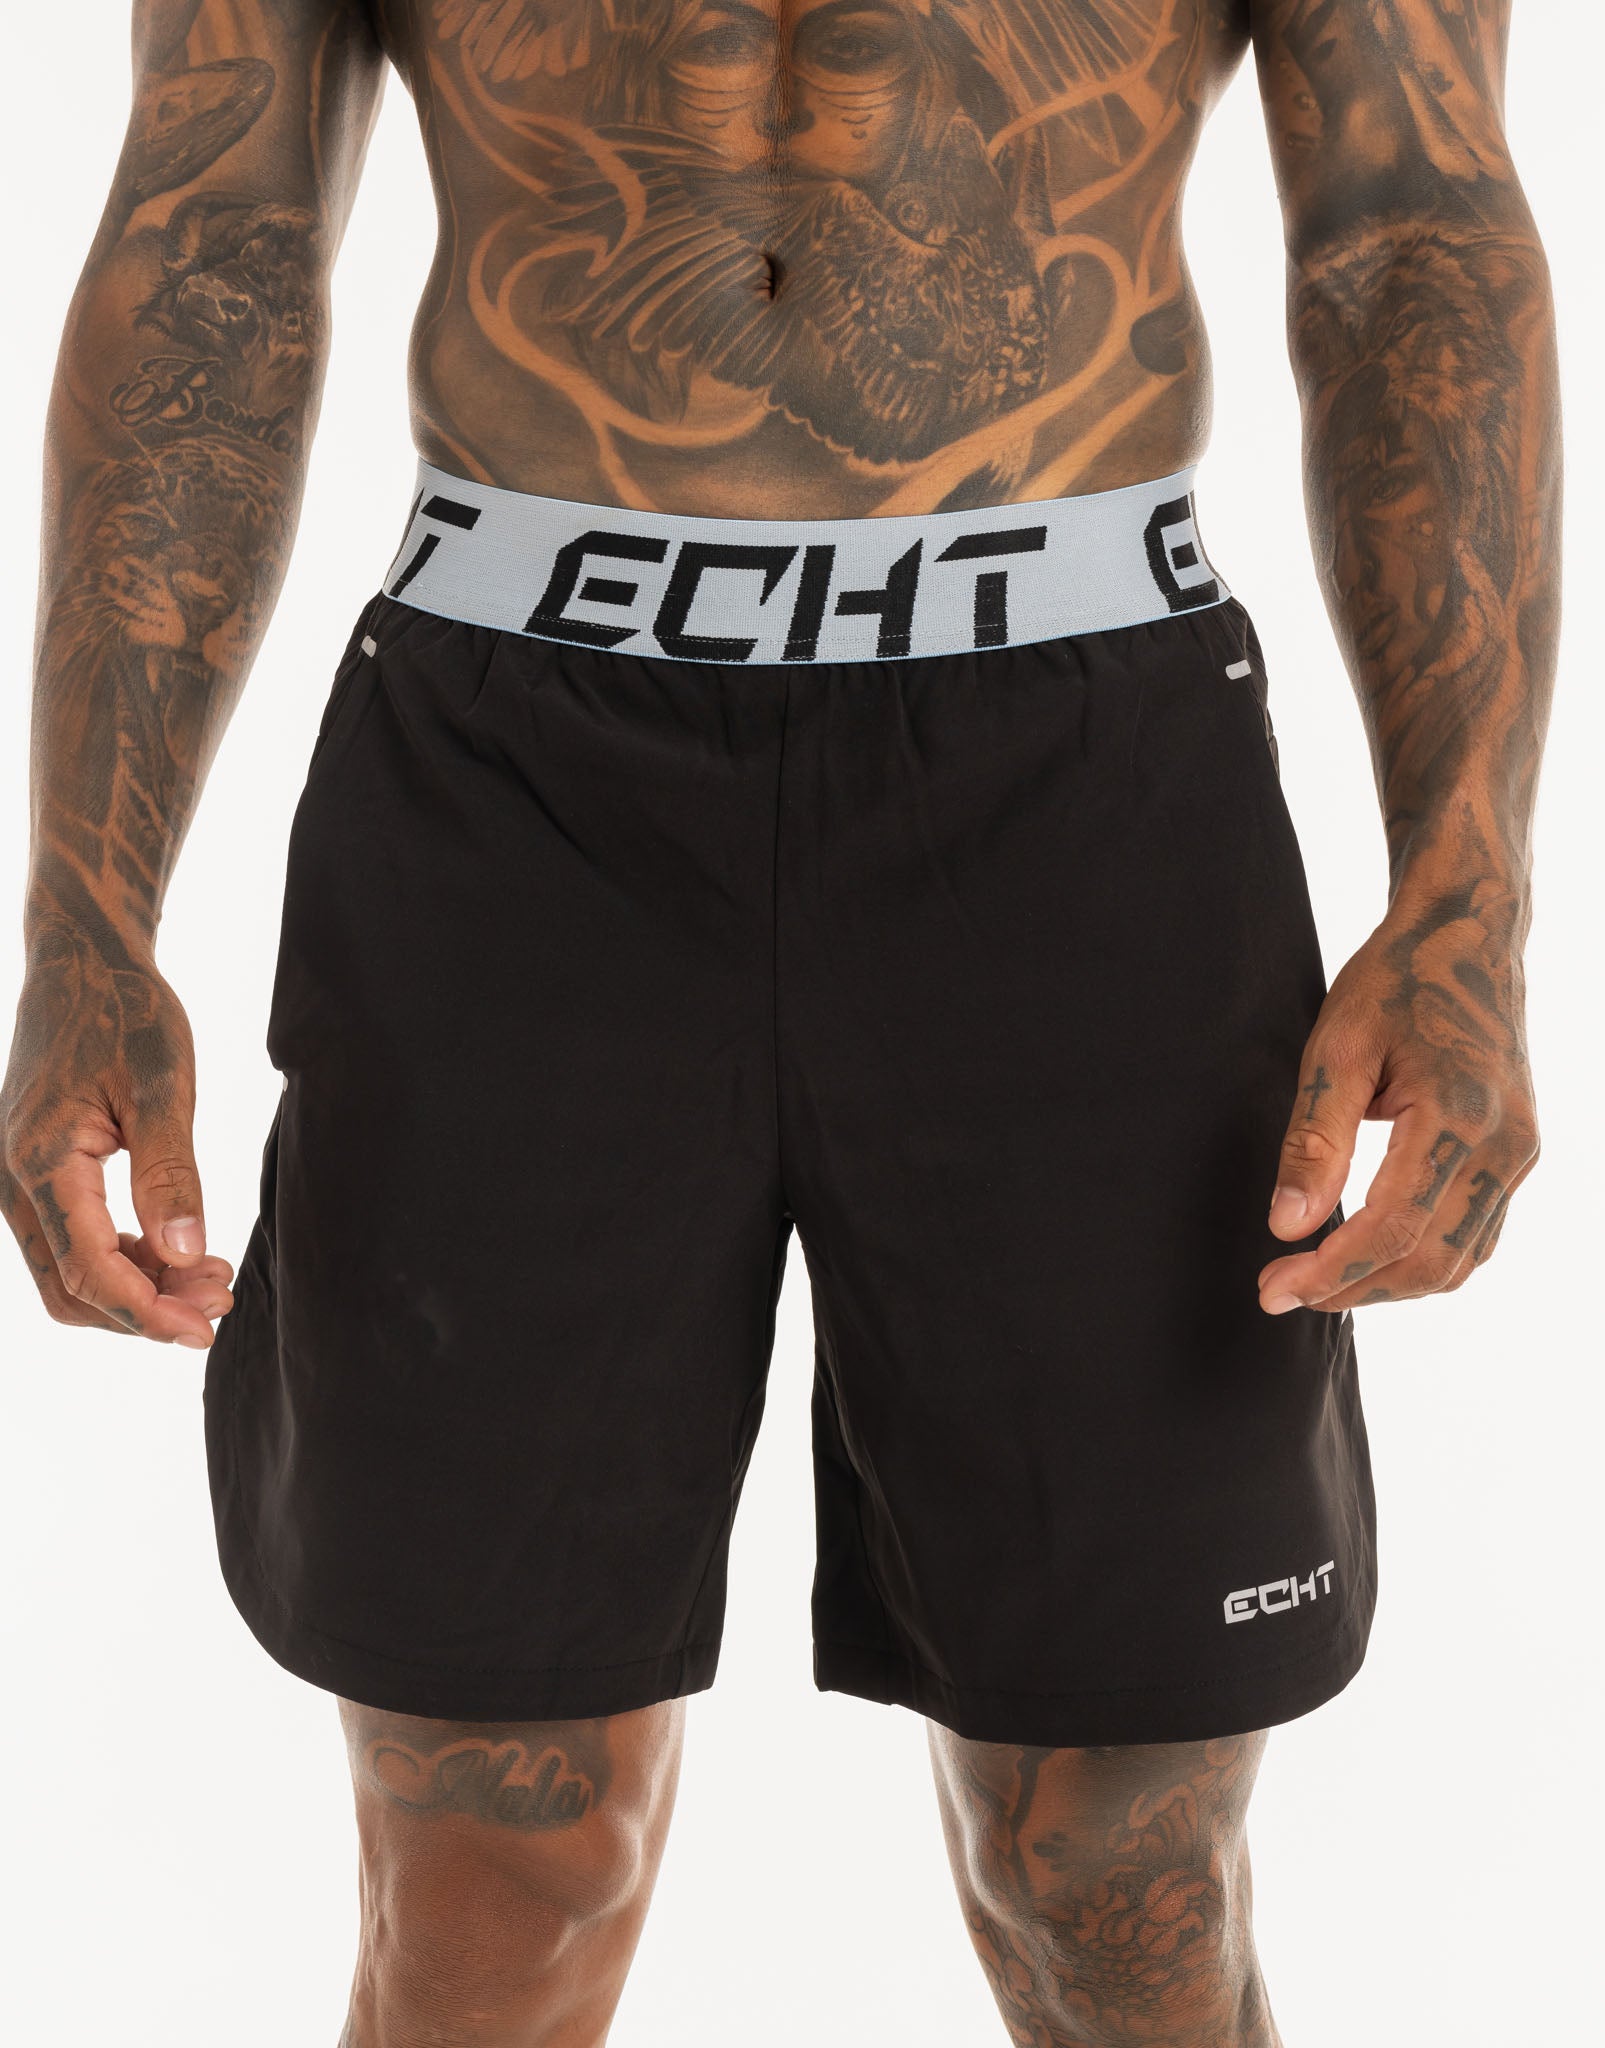 Ultimate Shorts - Stealth